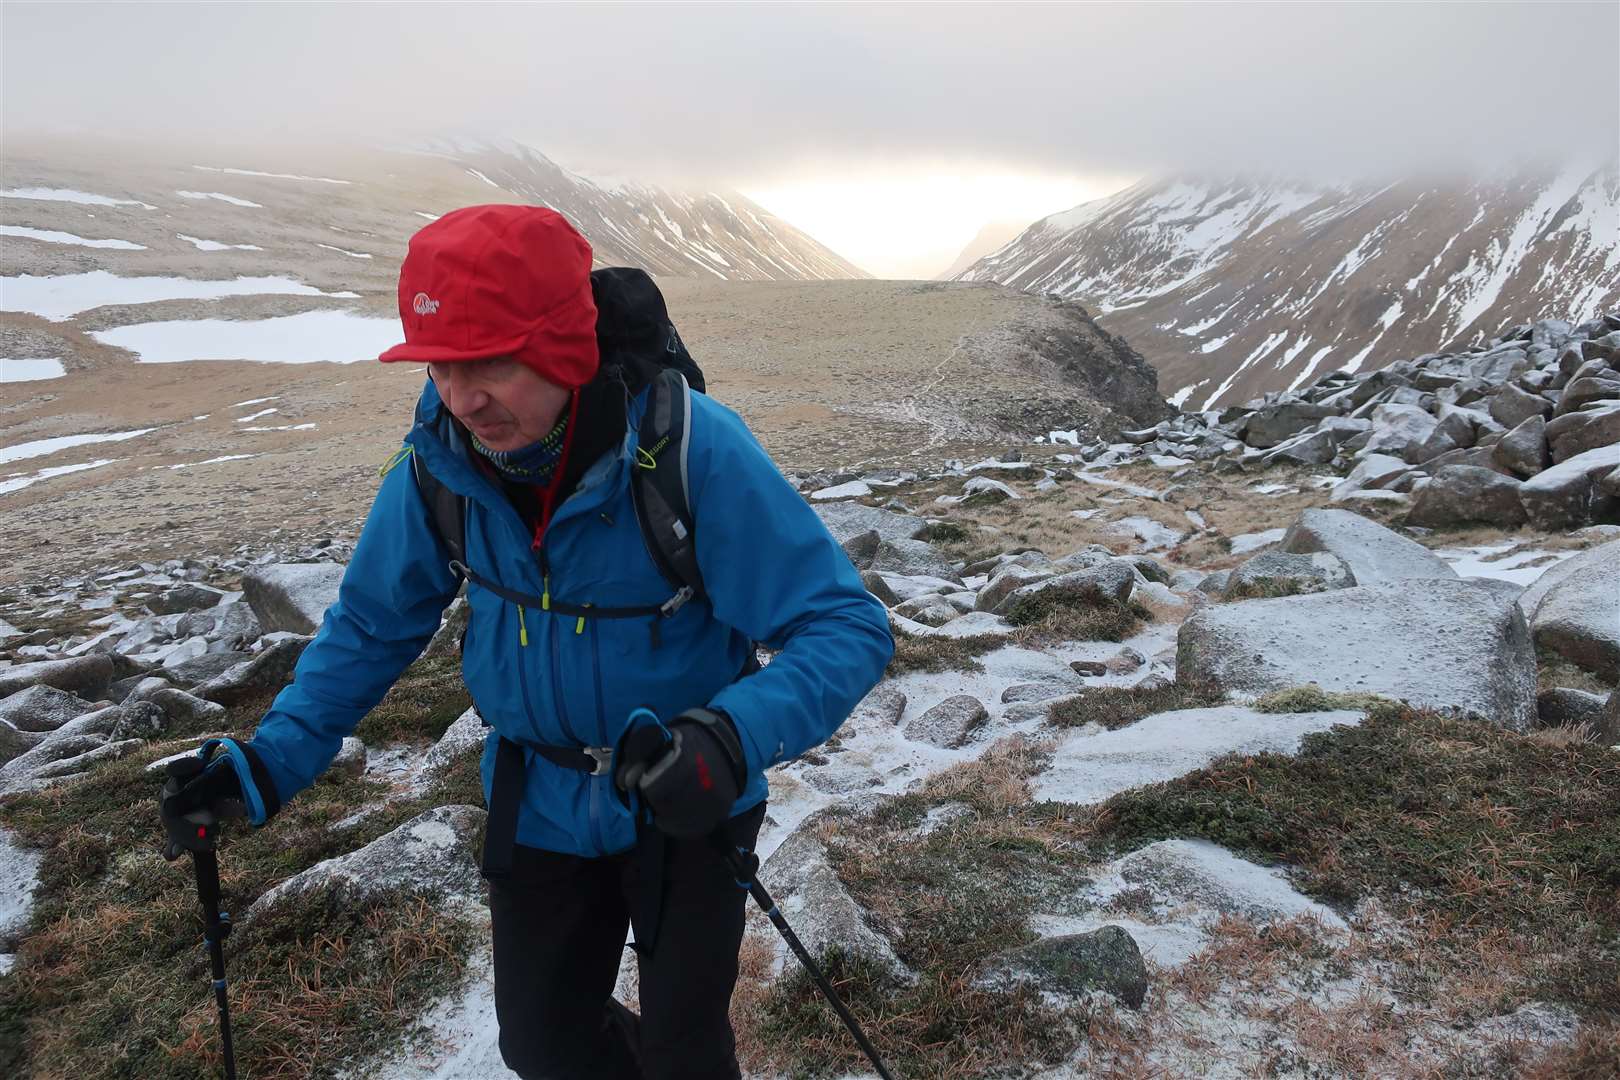 Peter Evans on the ascent to Lurcher's Crag last winter with the Lairig Ghru behind.